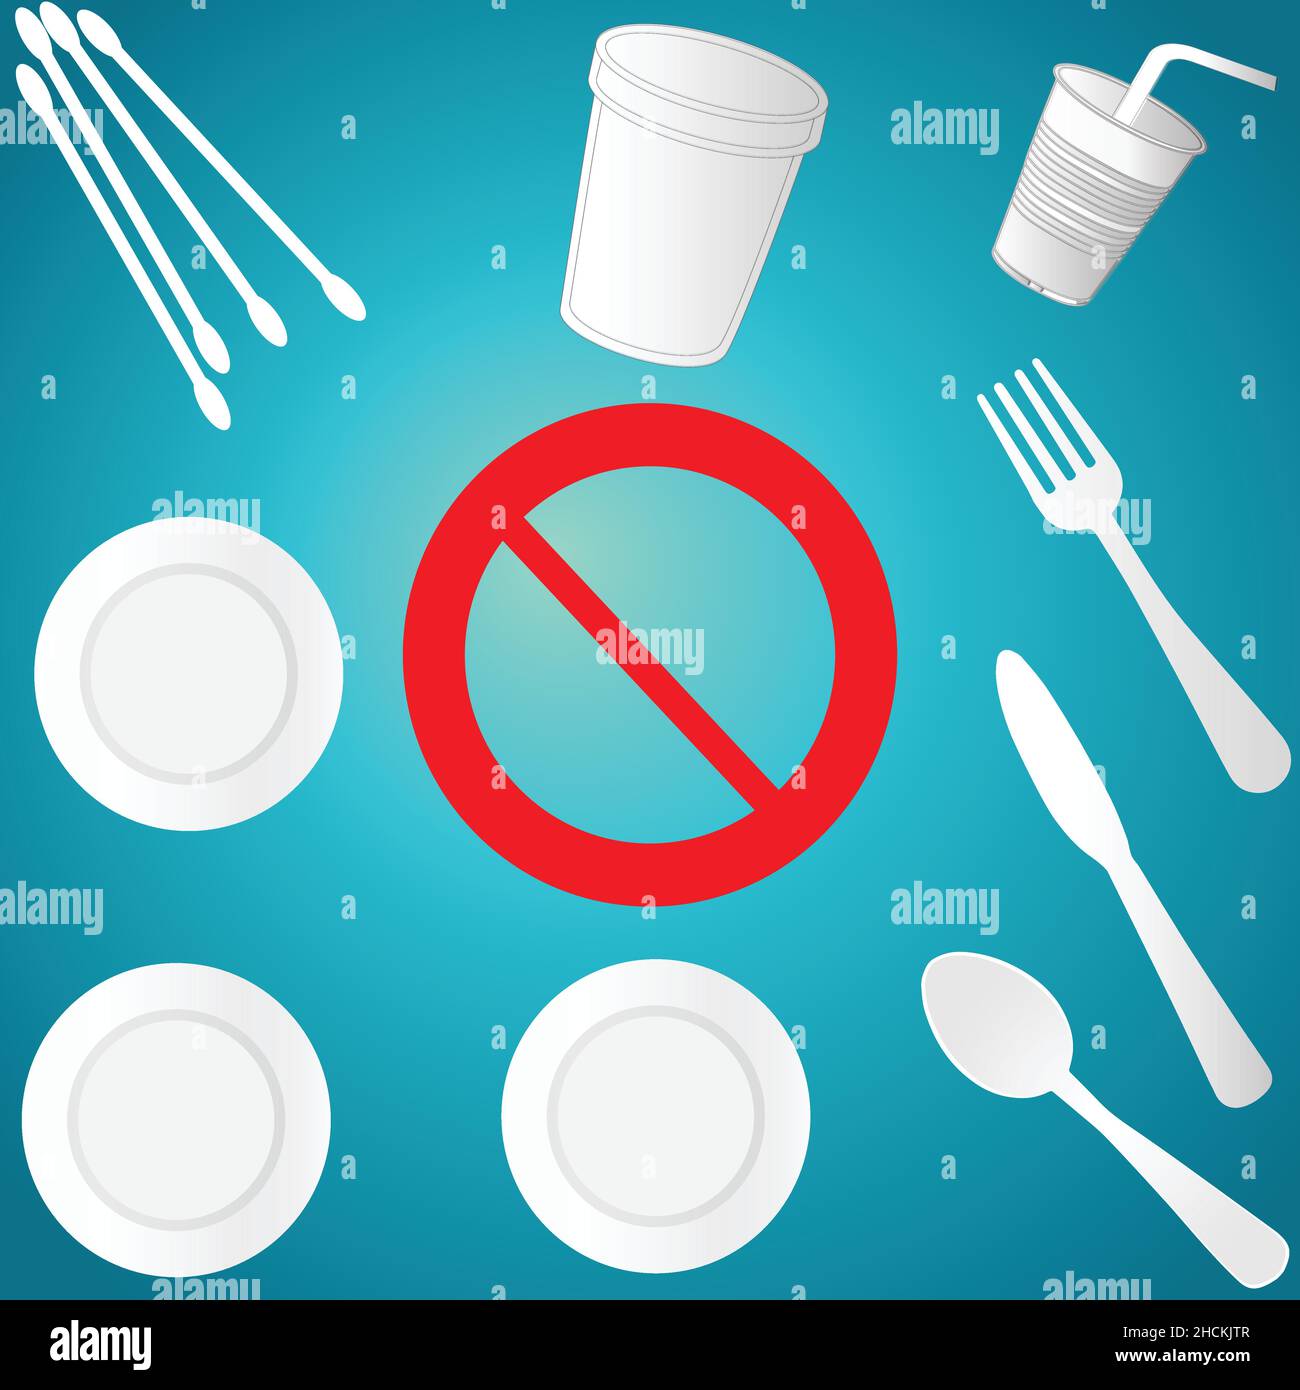 Single use plastic objects with prohibition sign Stock Vector